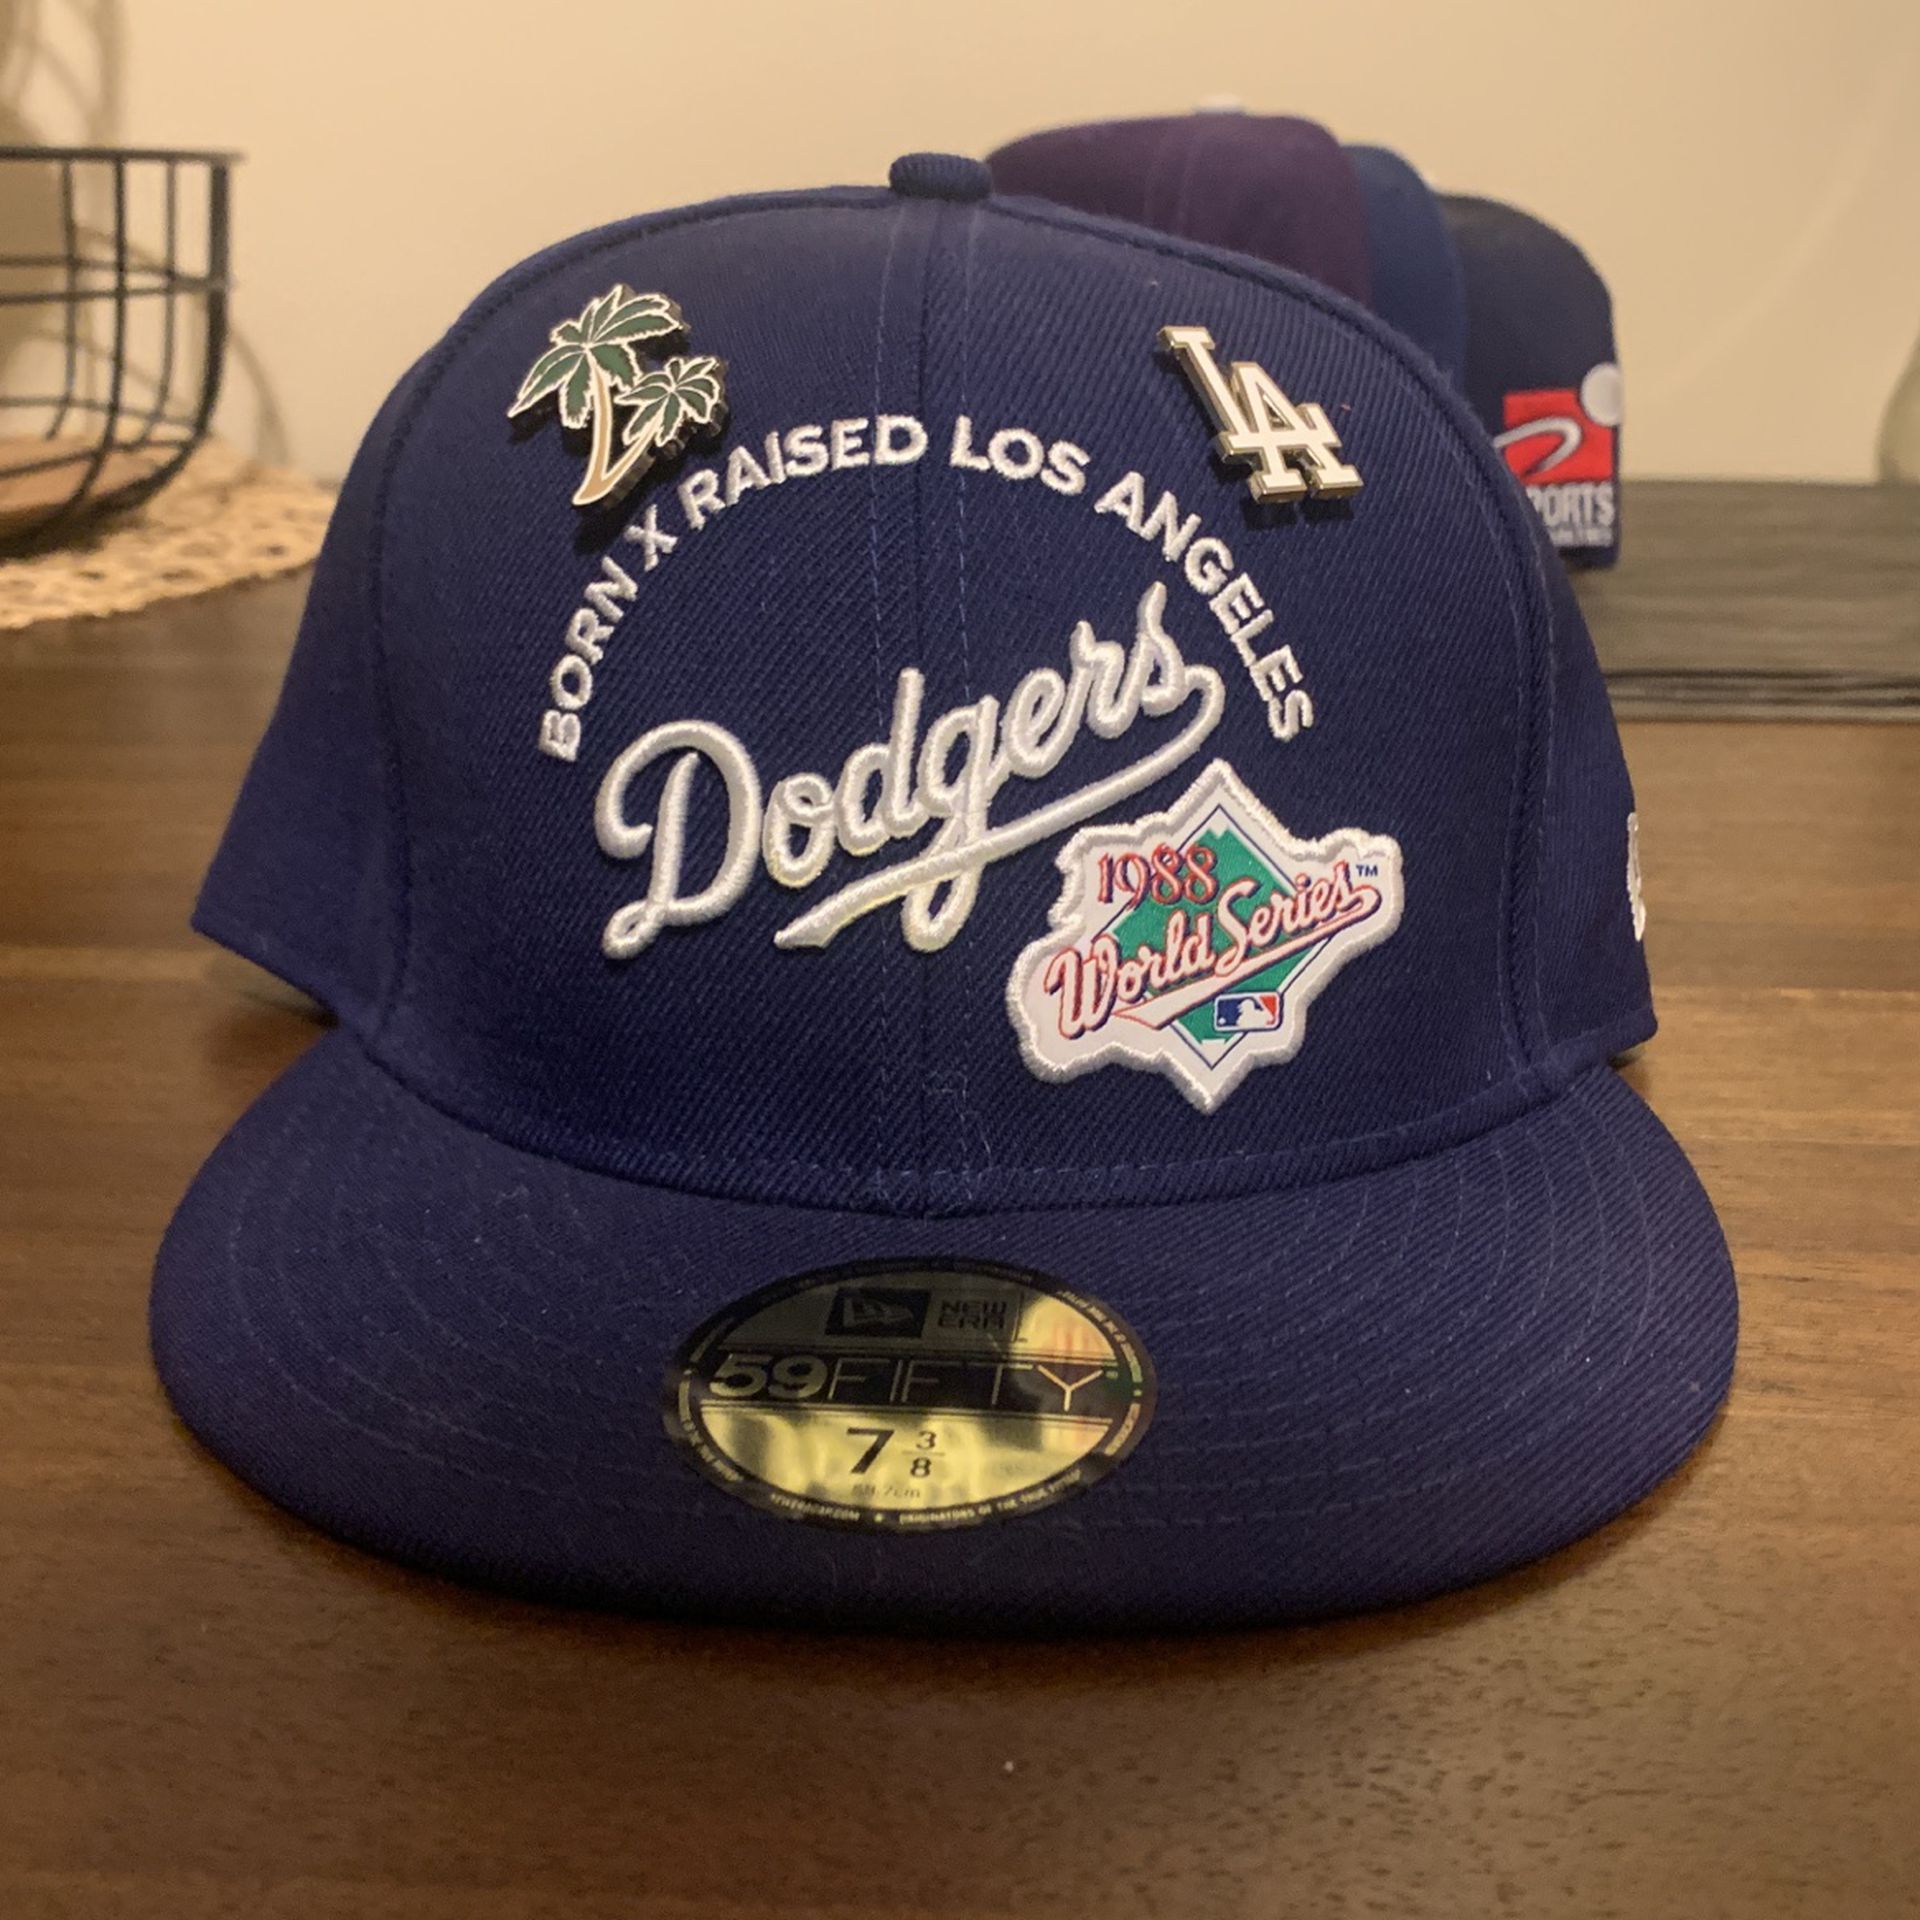 Born x Raised New Era Dodgers Pin Fitted Hat Size 7 3/8 for Sale in